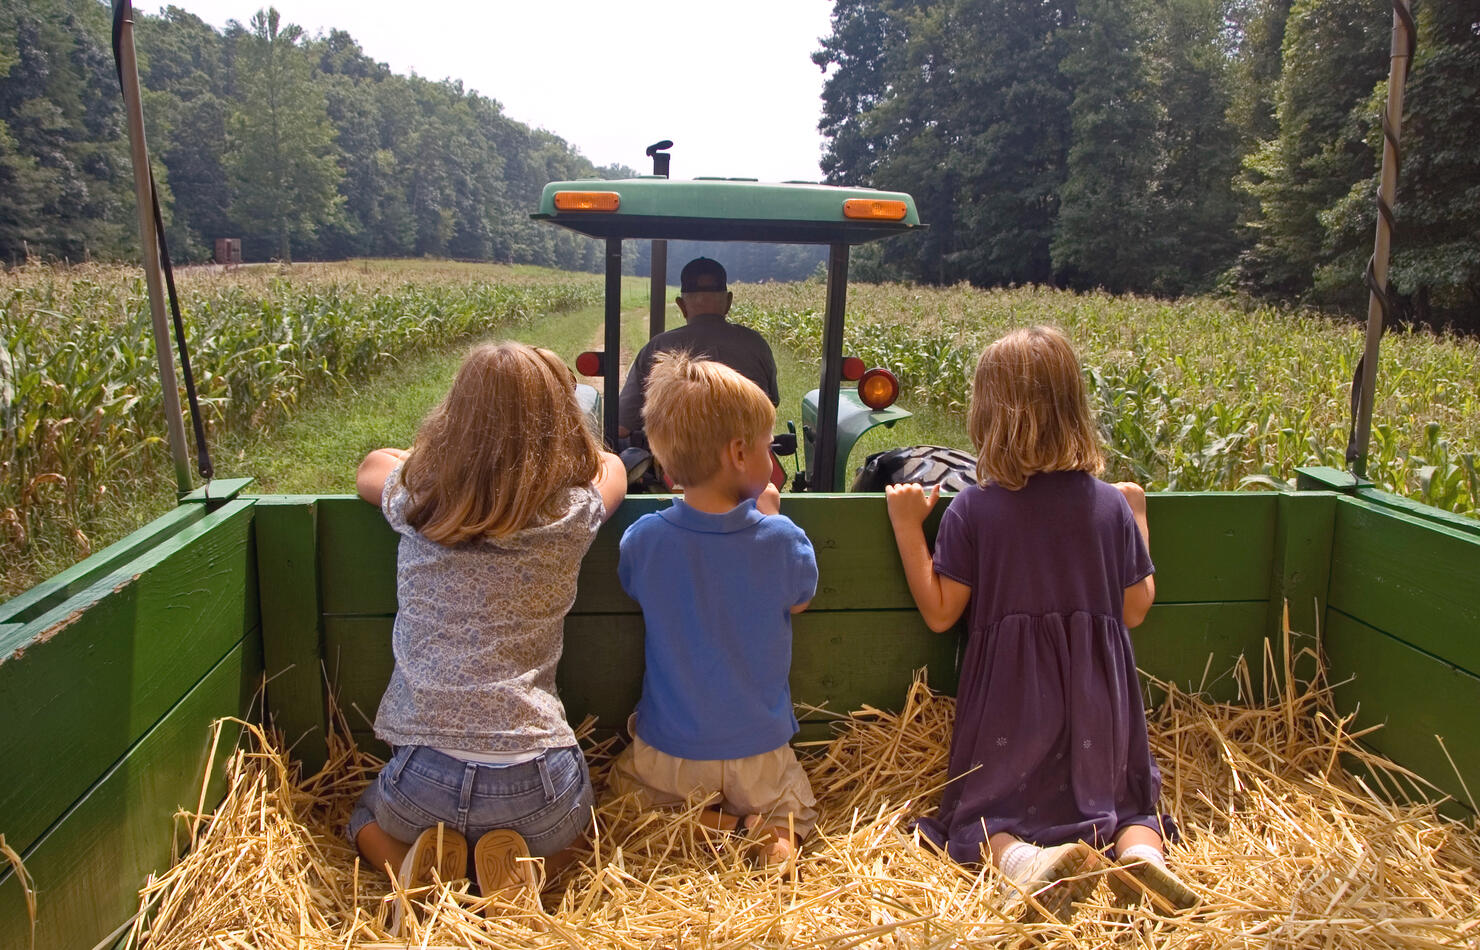 Siblings go for a hay ride